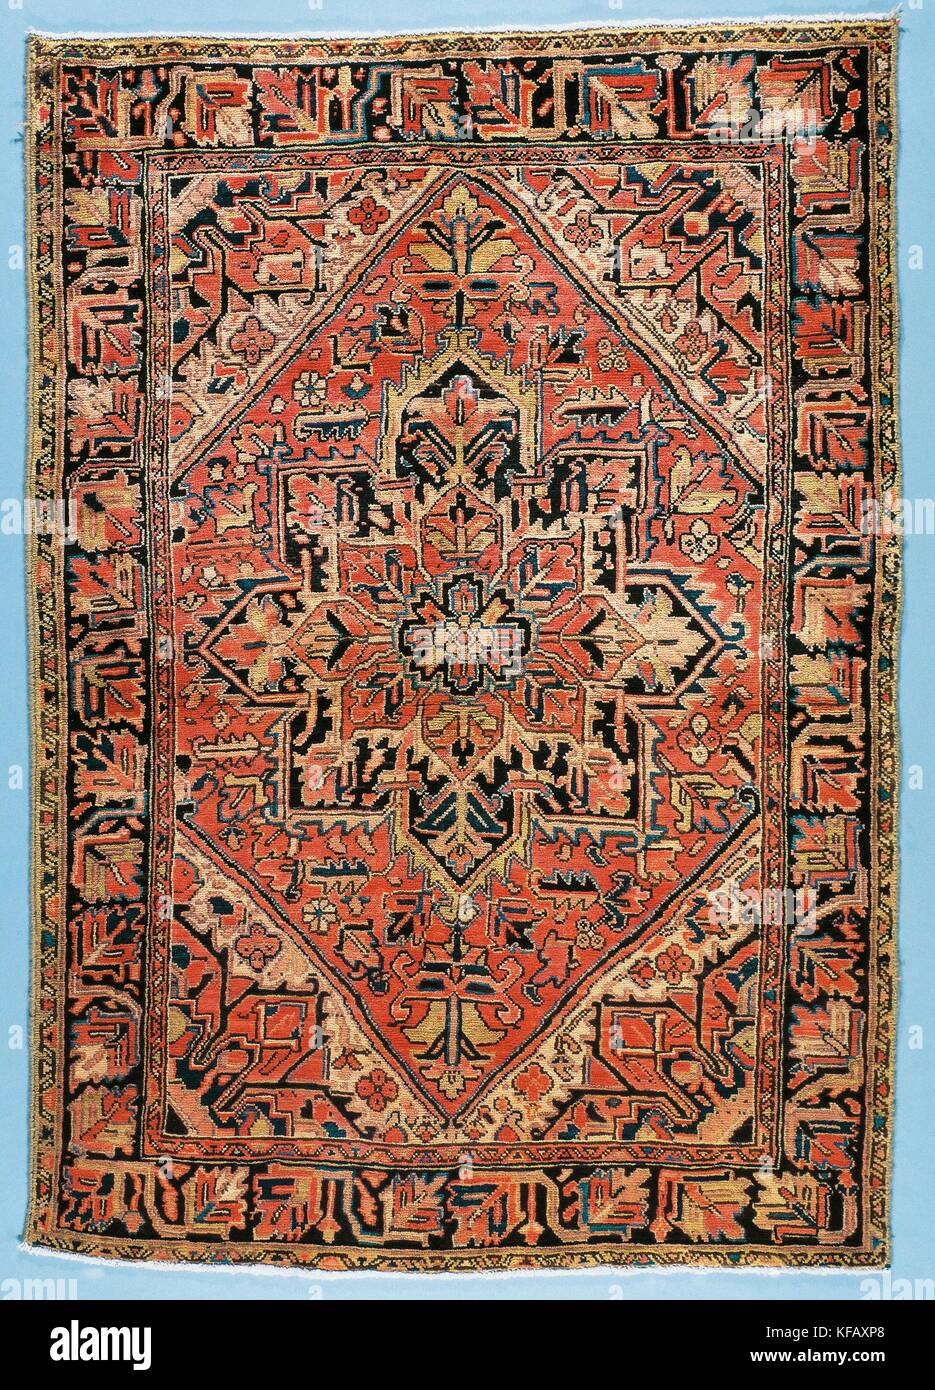 Rugs, Iran, Heriz rug with central medallion and stylized floral motif Canton, measuring 2.50 x 1.50 m. Stock Photo